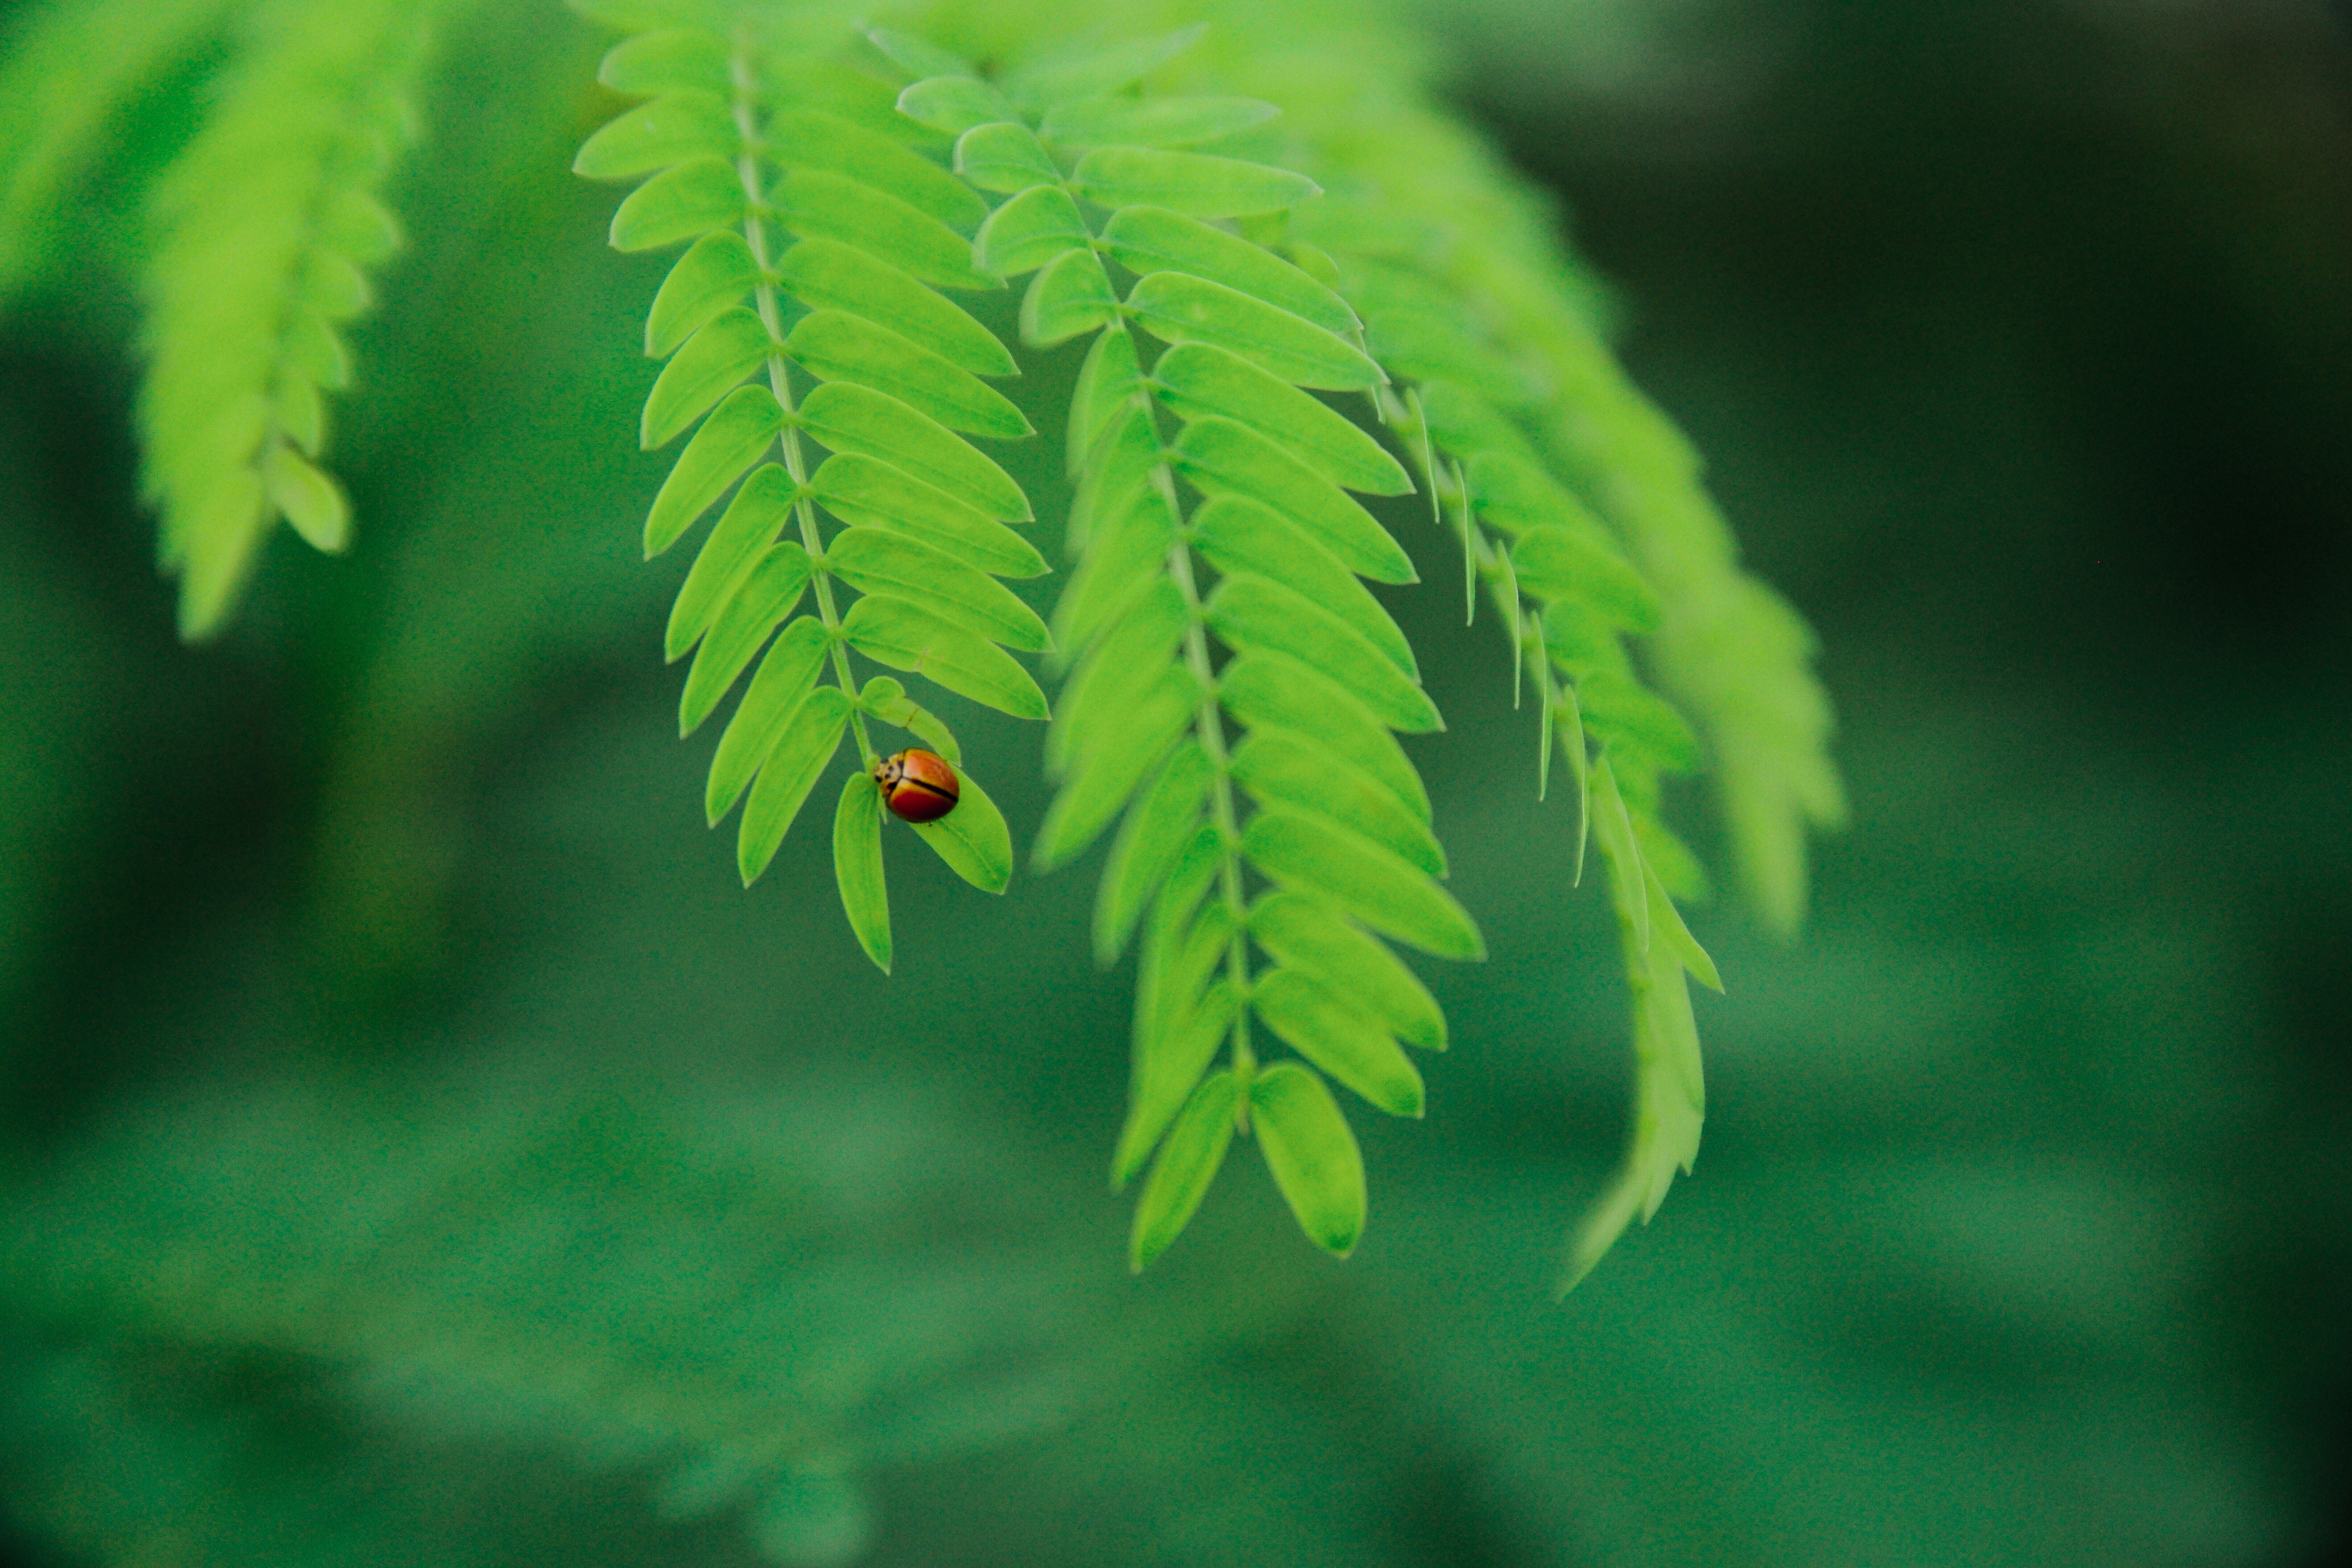 Selevtive Focus Photo of Ladybug on Green Leaf during Daytime, Insect, Tree, Summer, Outdoors, HQ Photo